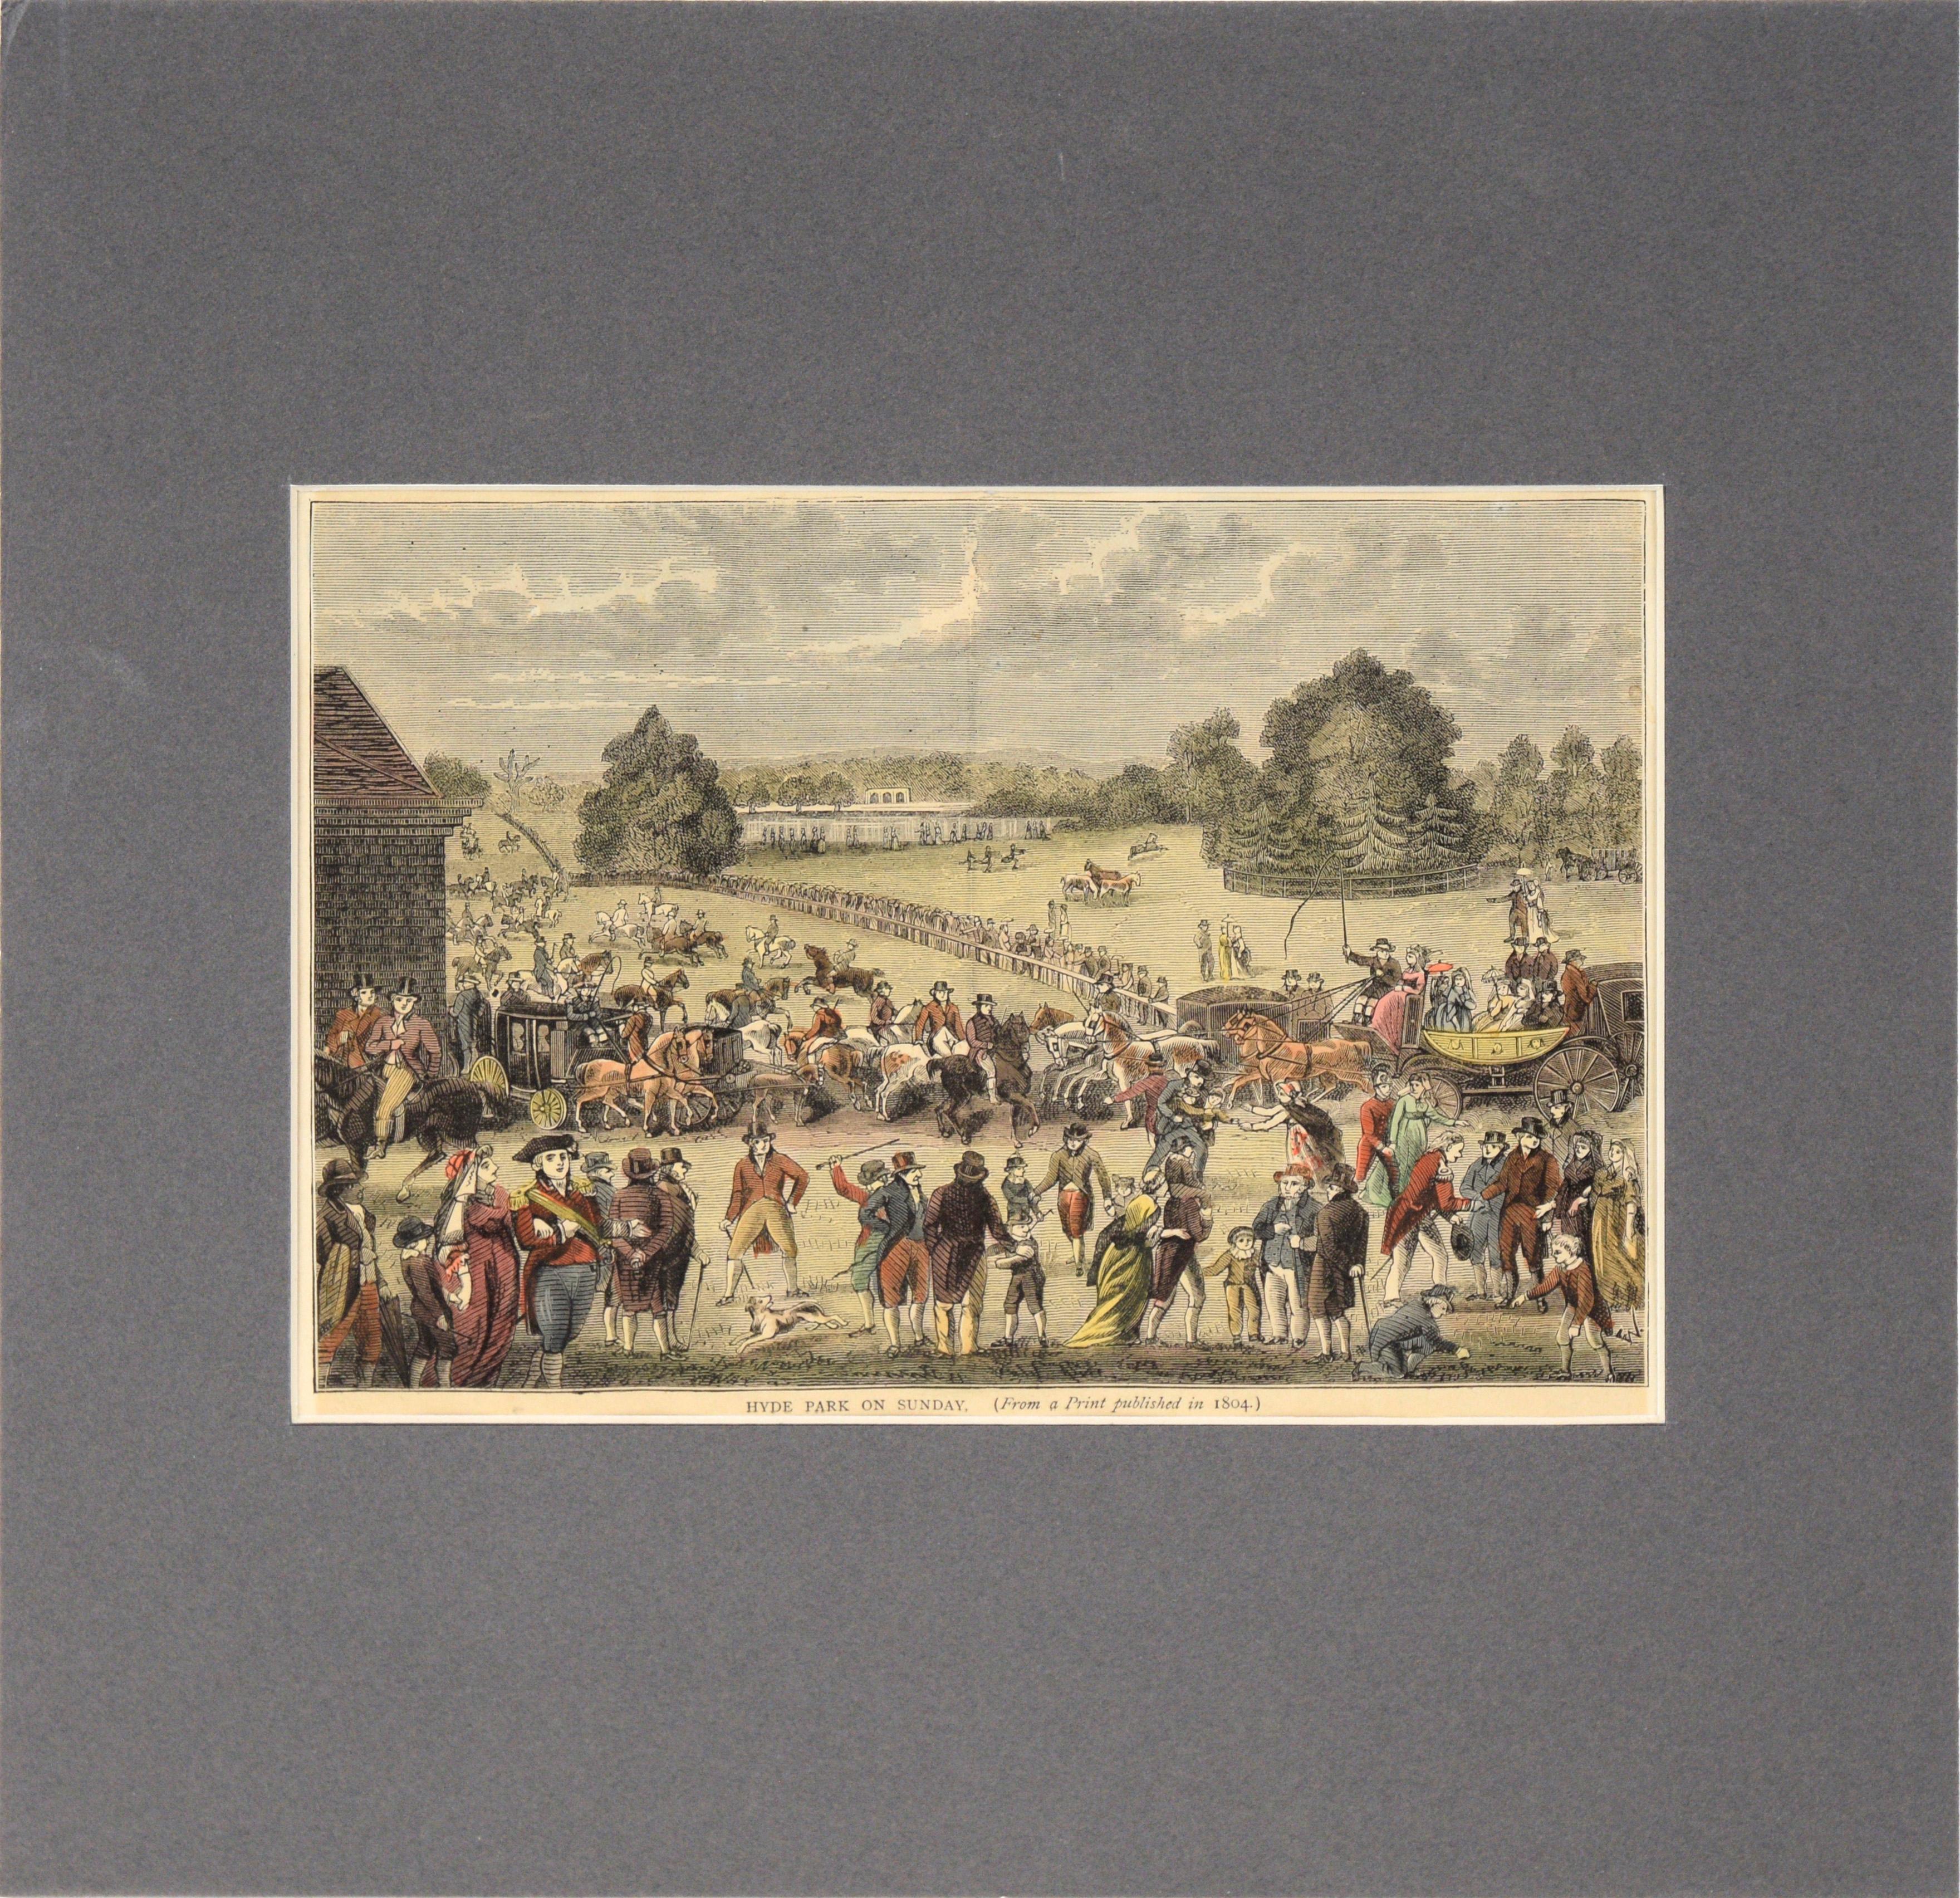 "Hyde Park on Sunday" - Hand Colored Etching from "Old and New London"